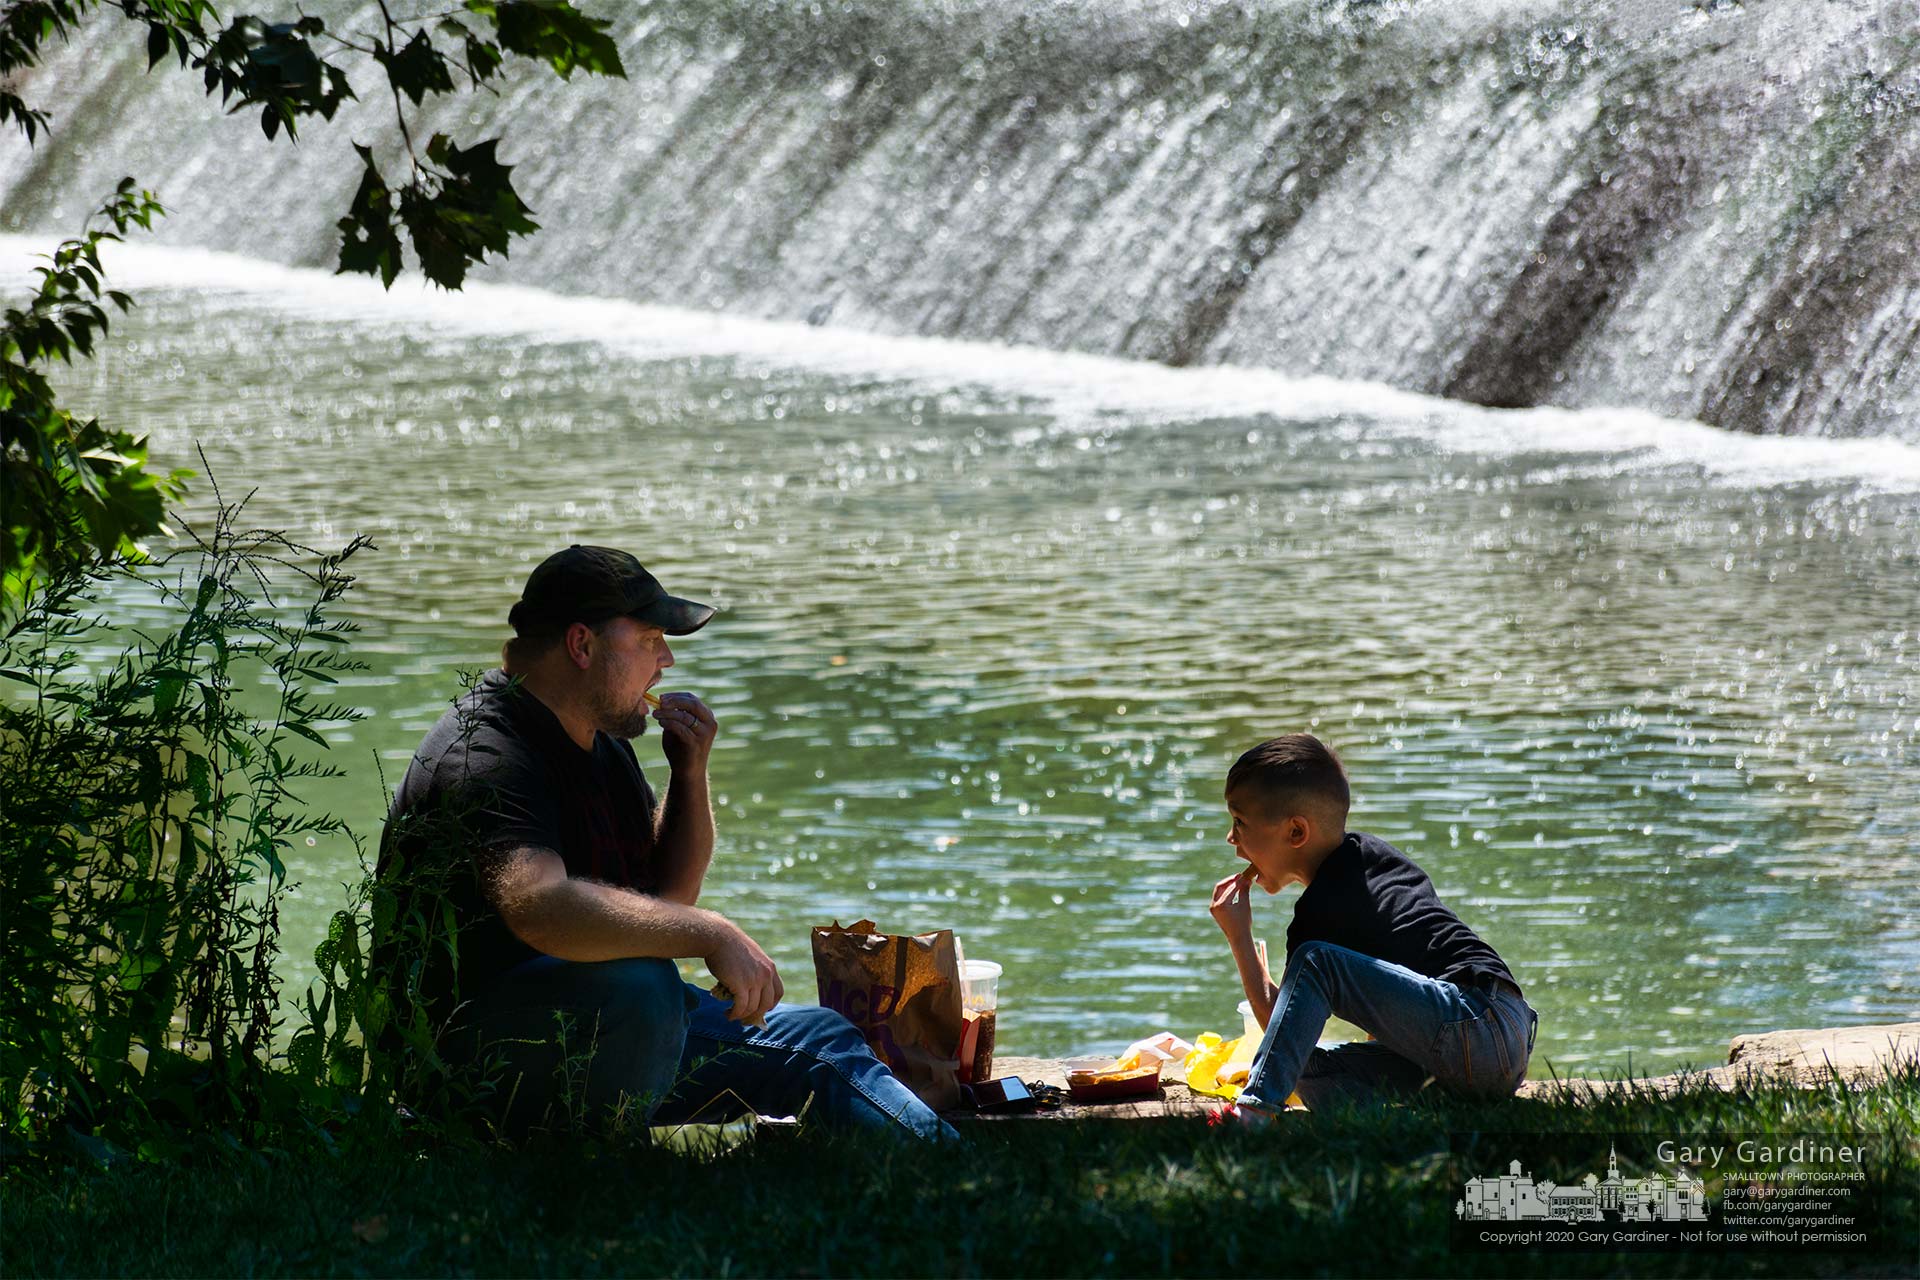 A father and son enjoy their fast food meal on the concrete abutment at the spillway in Alum Creek at Alum Creek Park North in Westerville. My Final Photo for Aug. 20, 2020.